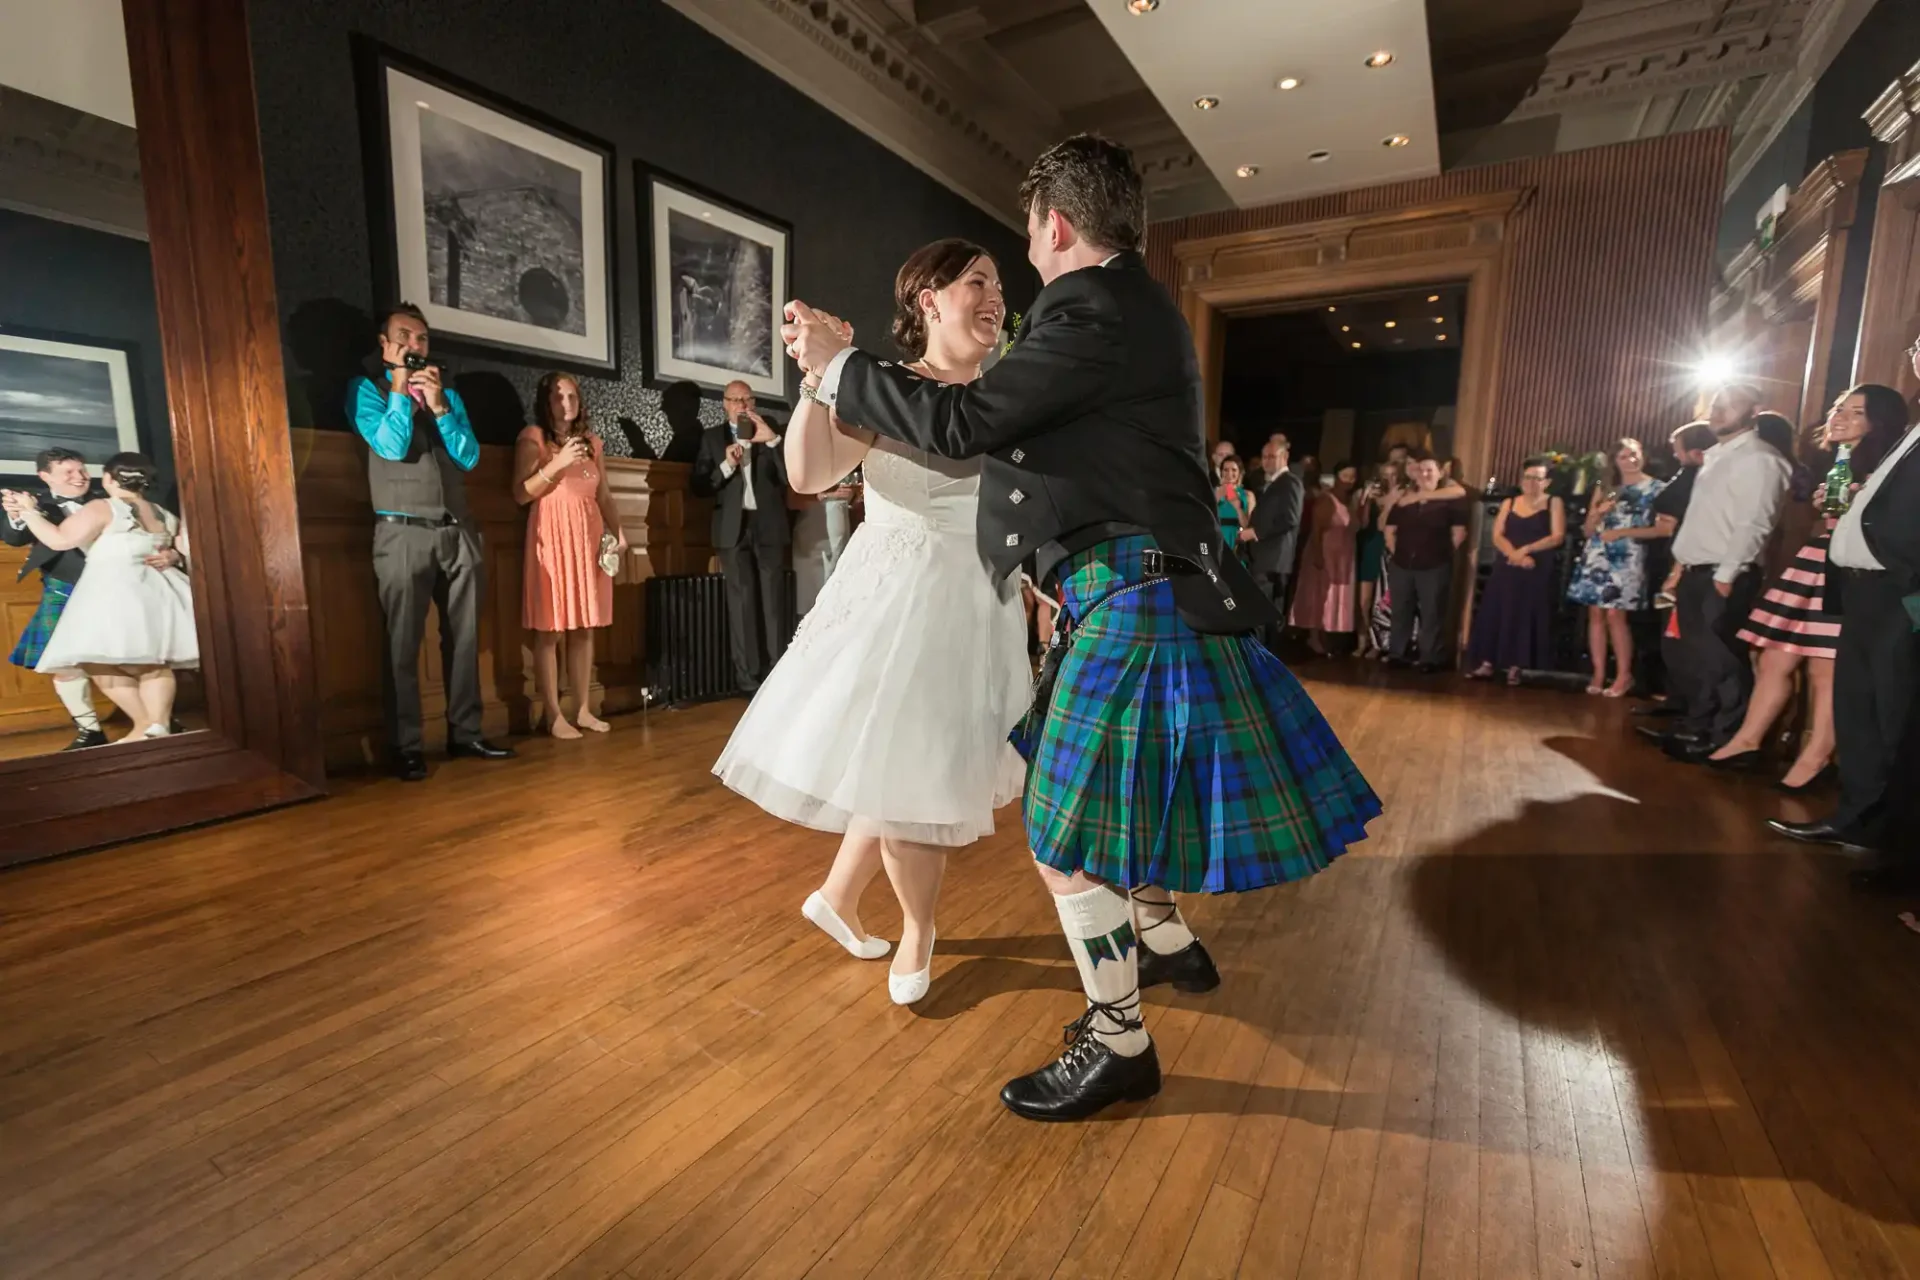 A joyful bride and groom dancing in a ballroom, surrounded by guests. the groom wears a kilt and the bride a short wedding dress.